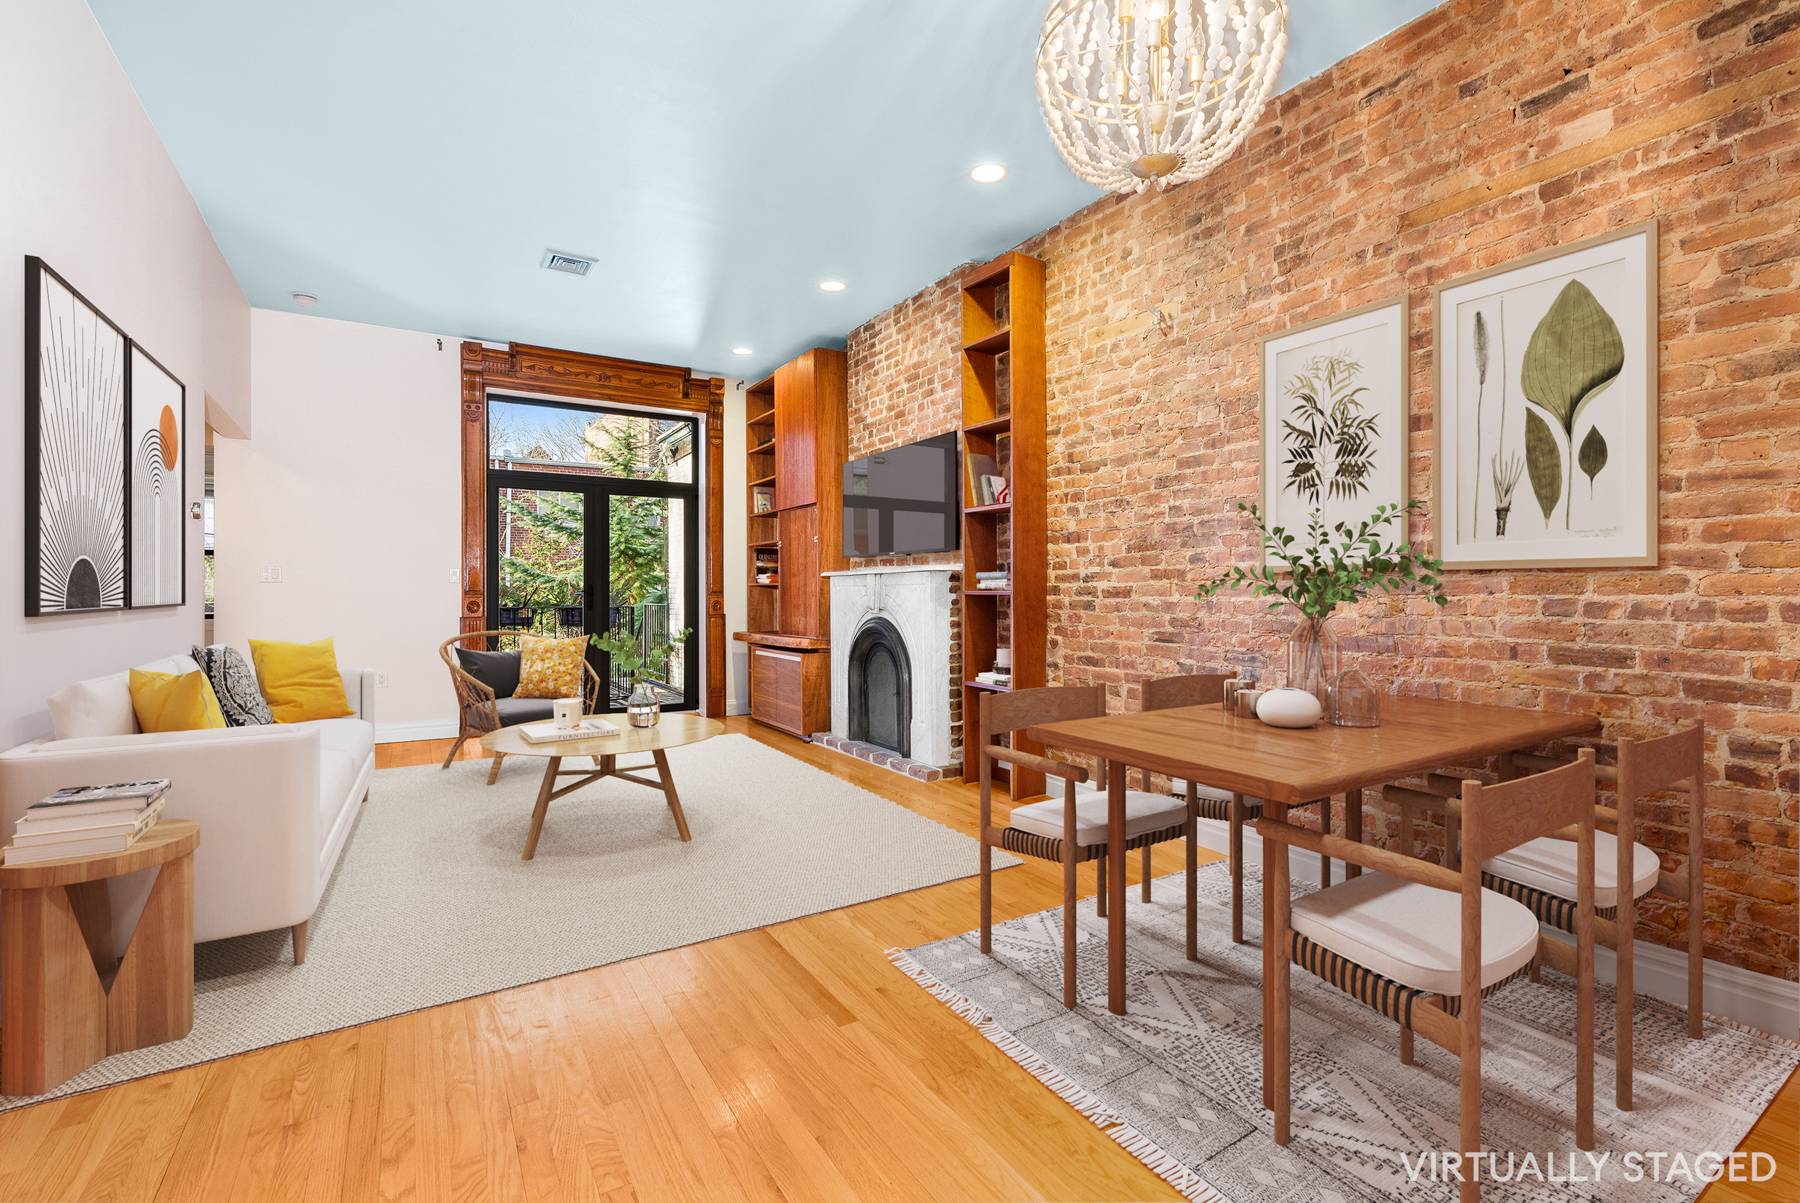 502 1st Street 2 is a breathtaking two bedroom, two bathroom parlor floor duplex condo with its very own private garden on a coveted Park Slope block.